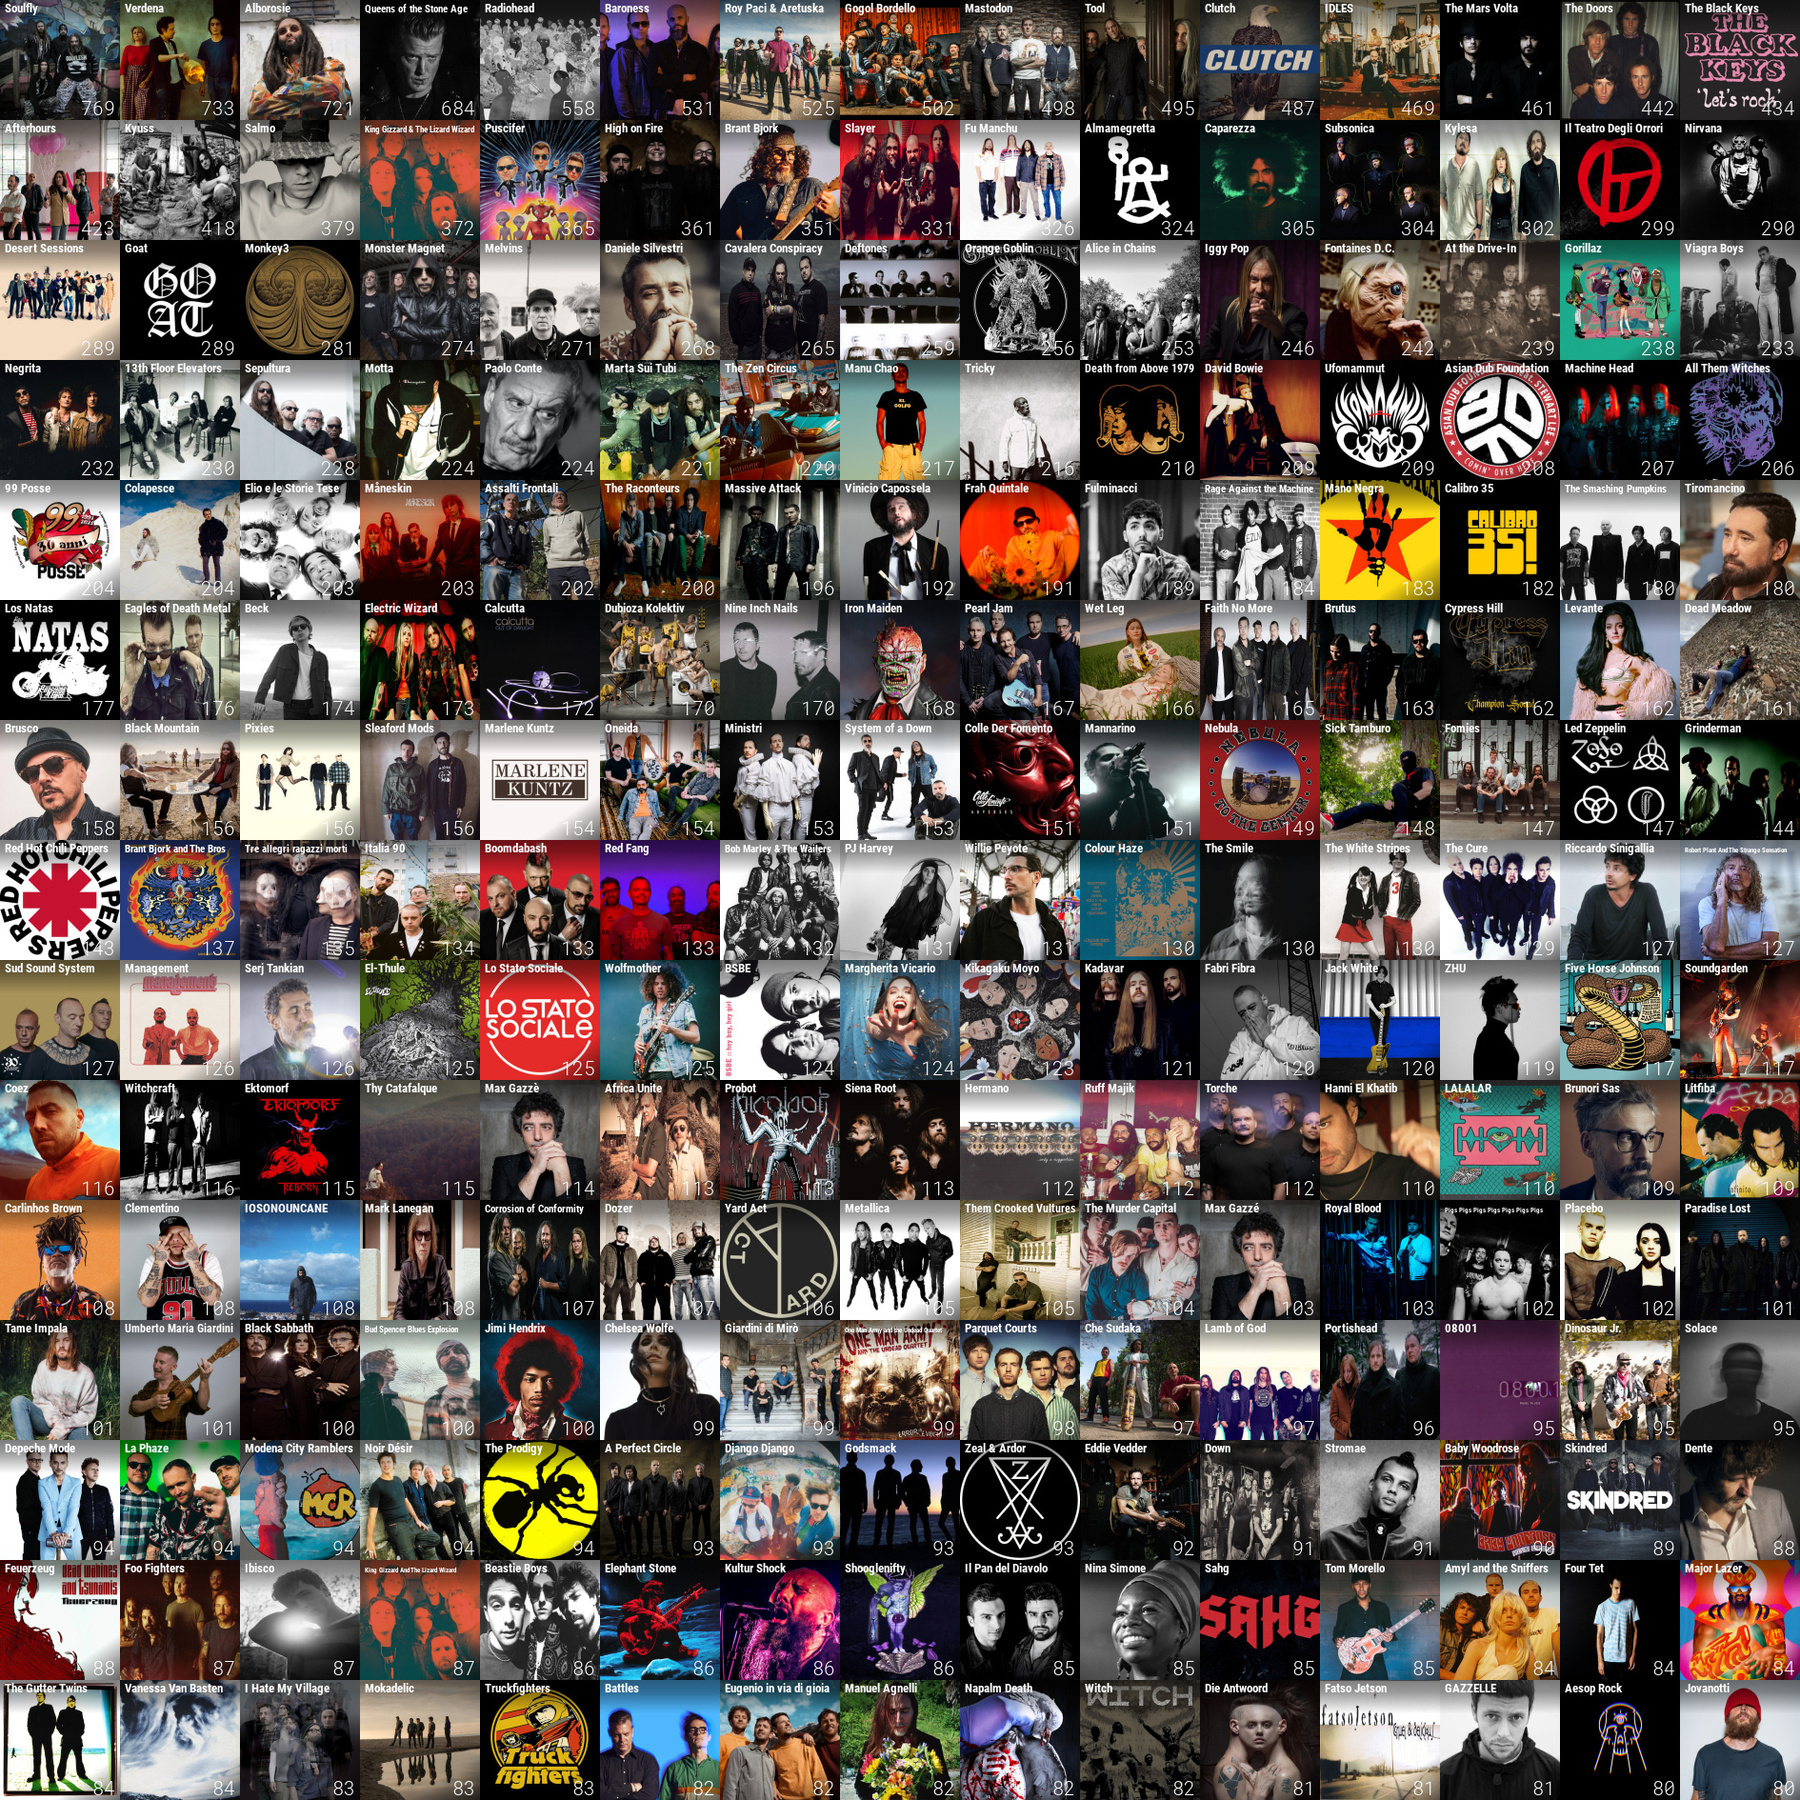 Patchwork artists from stonedex's lastfm stats